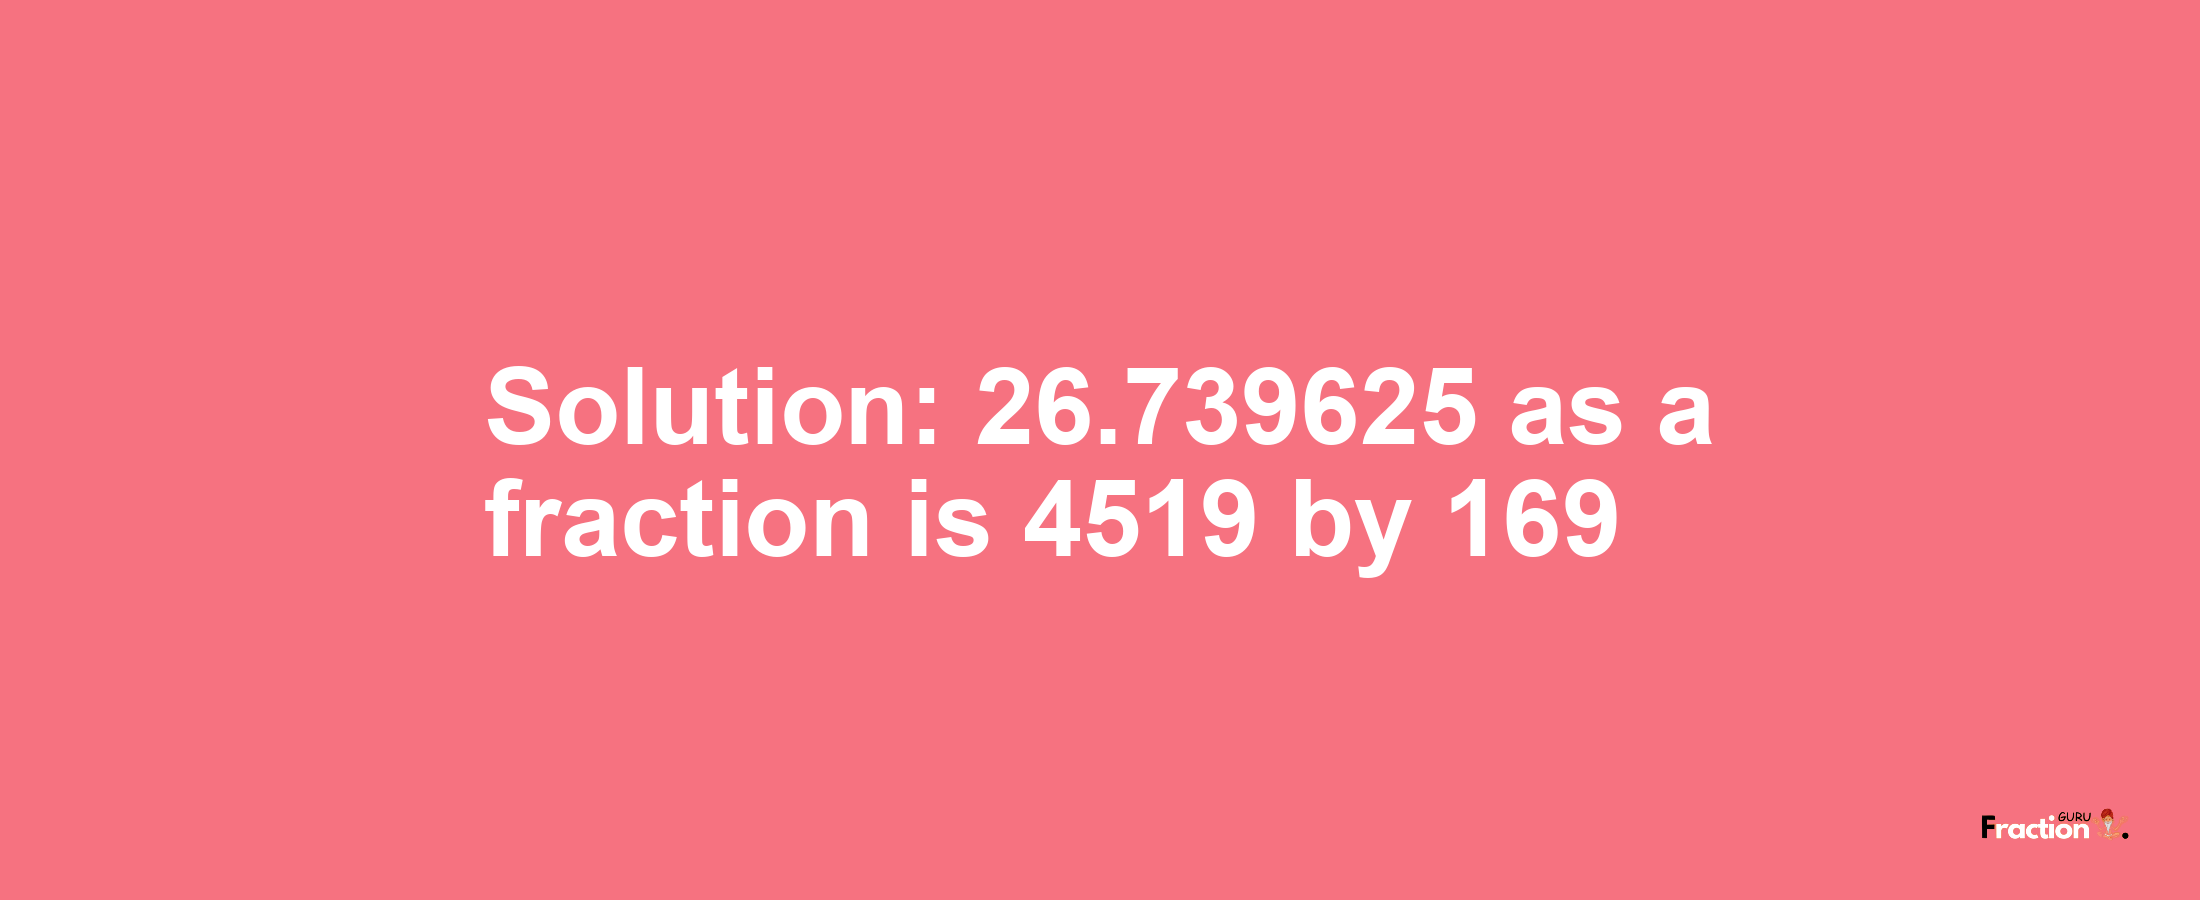 Solution:26.739625 as a fraction is 4519/169